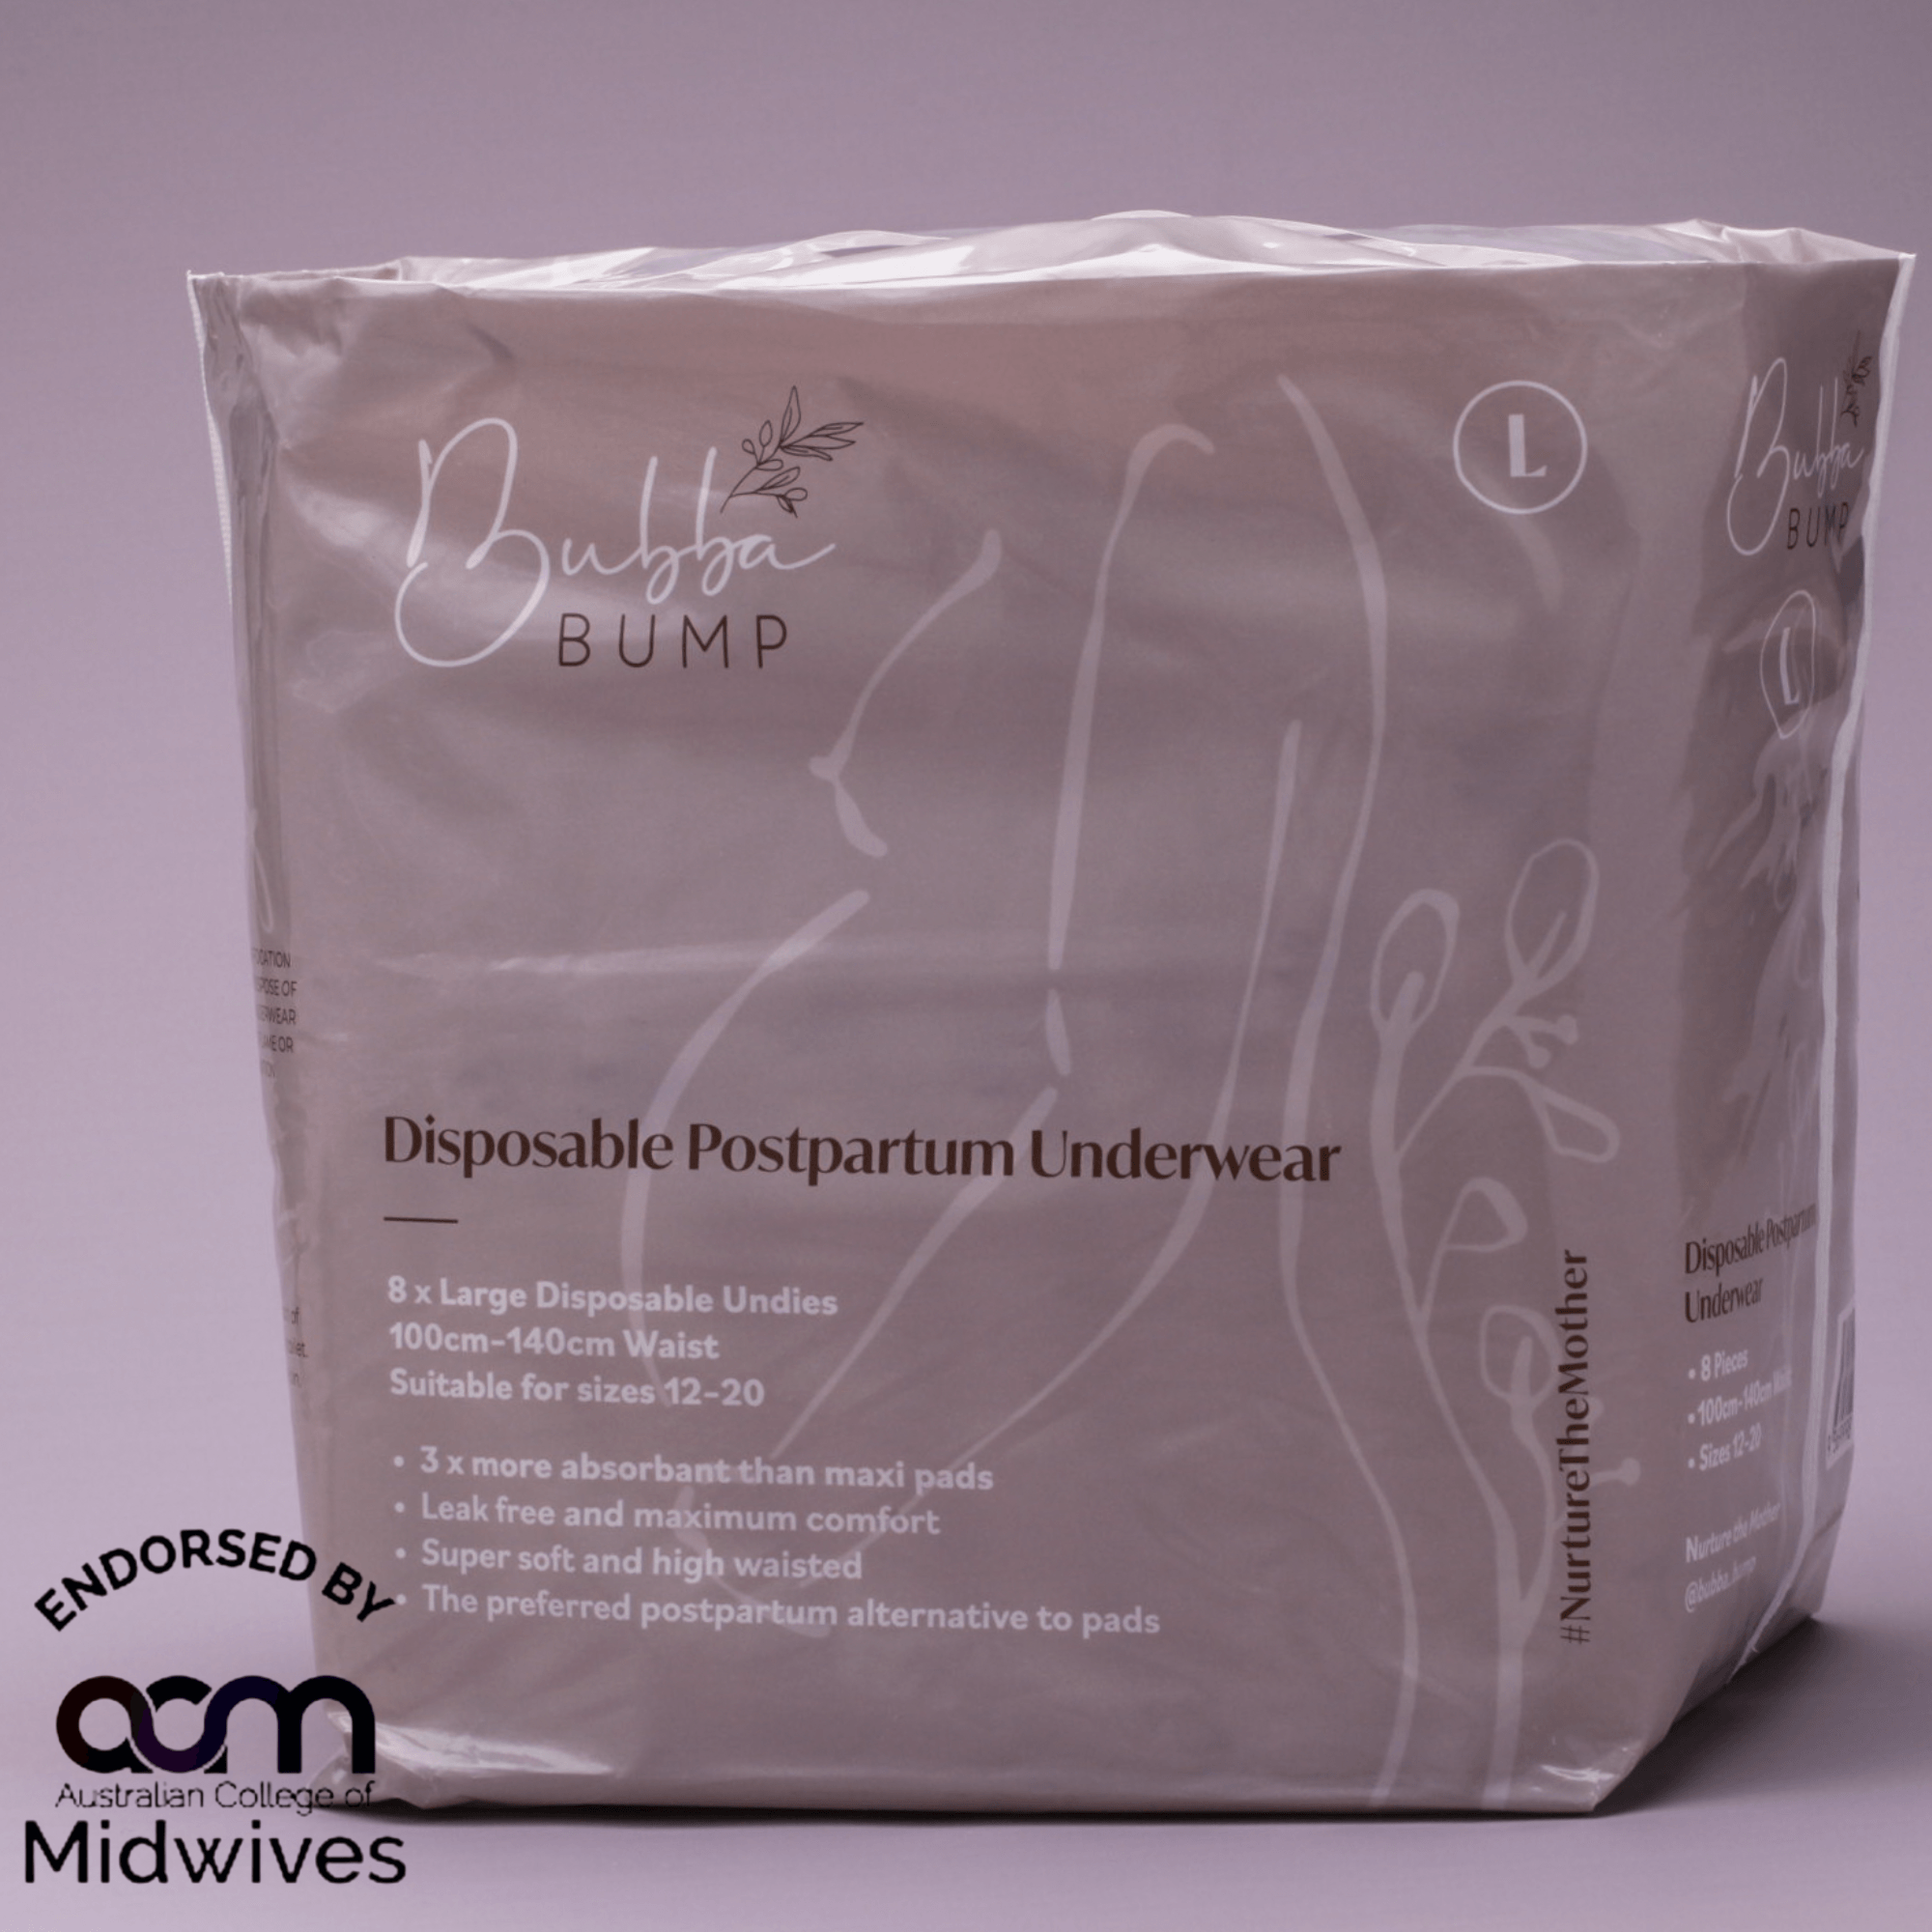 Buy Our Postpartum Essential Products Online